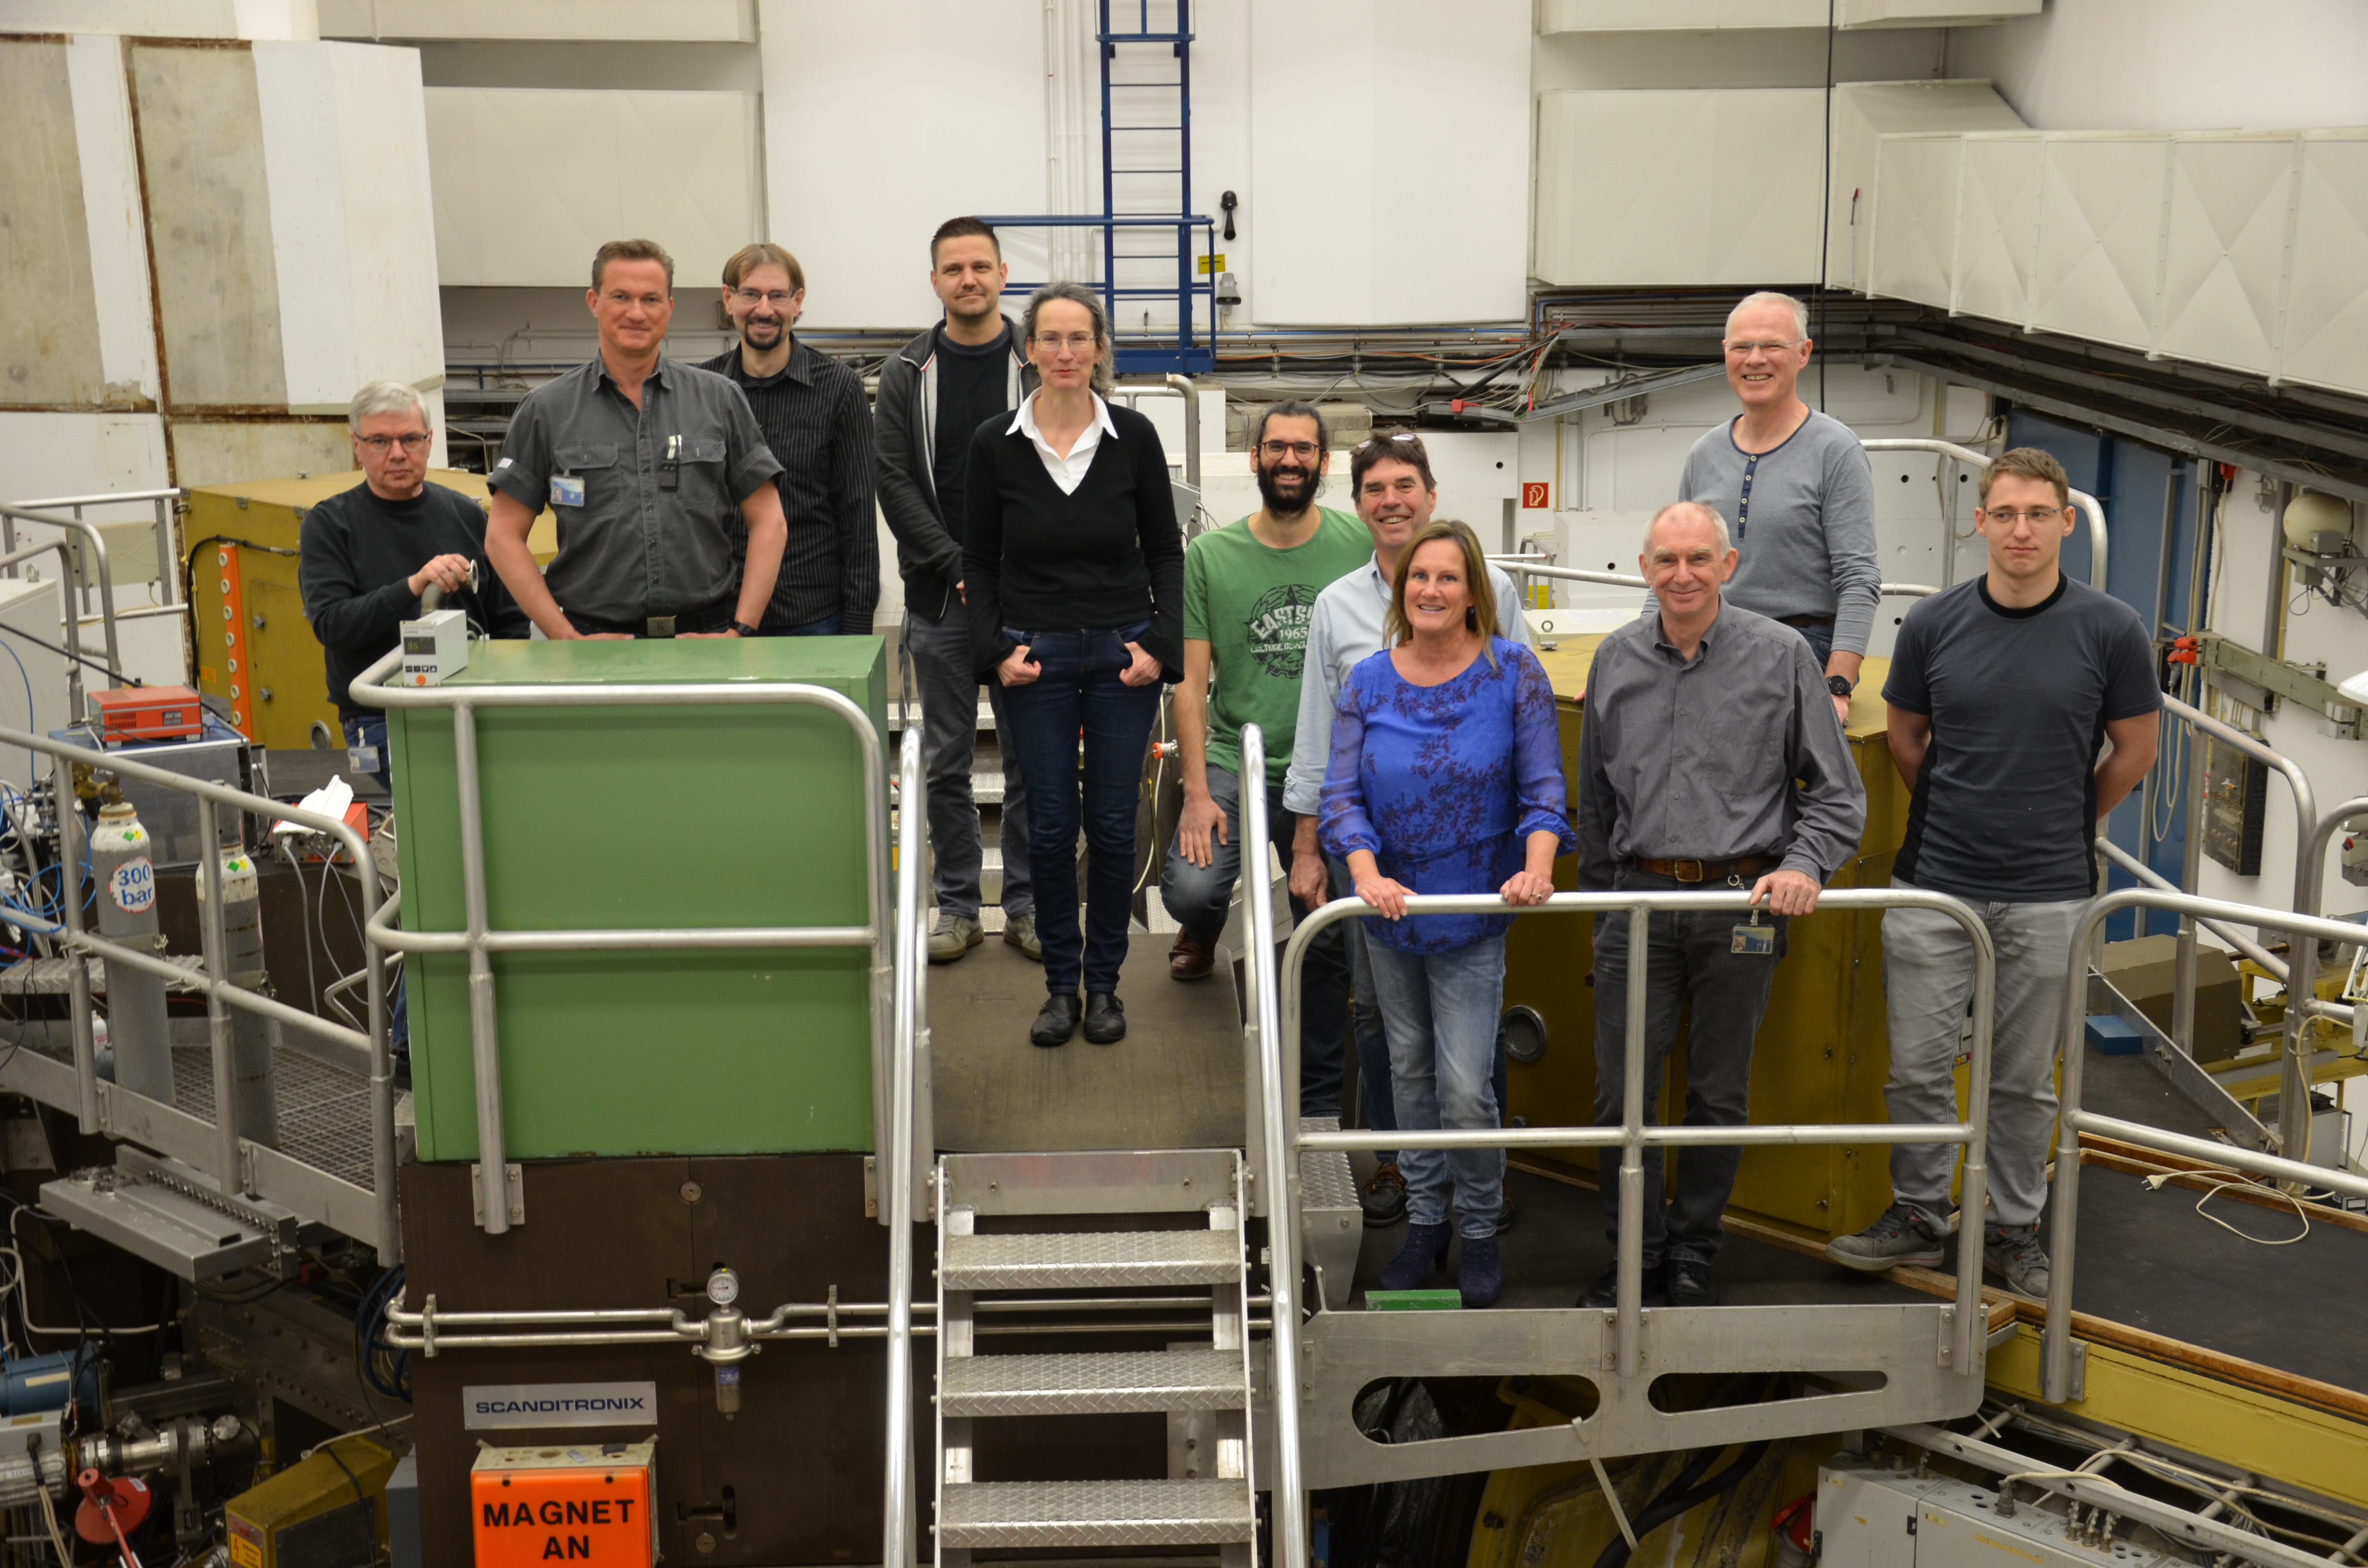 Group photo of the Department of Protons in Therapy at Helmholtz-Zentrum Berlin. - enlarged view